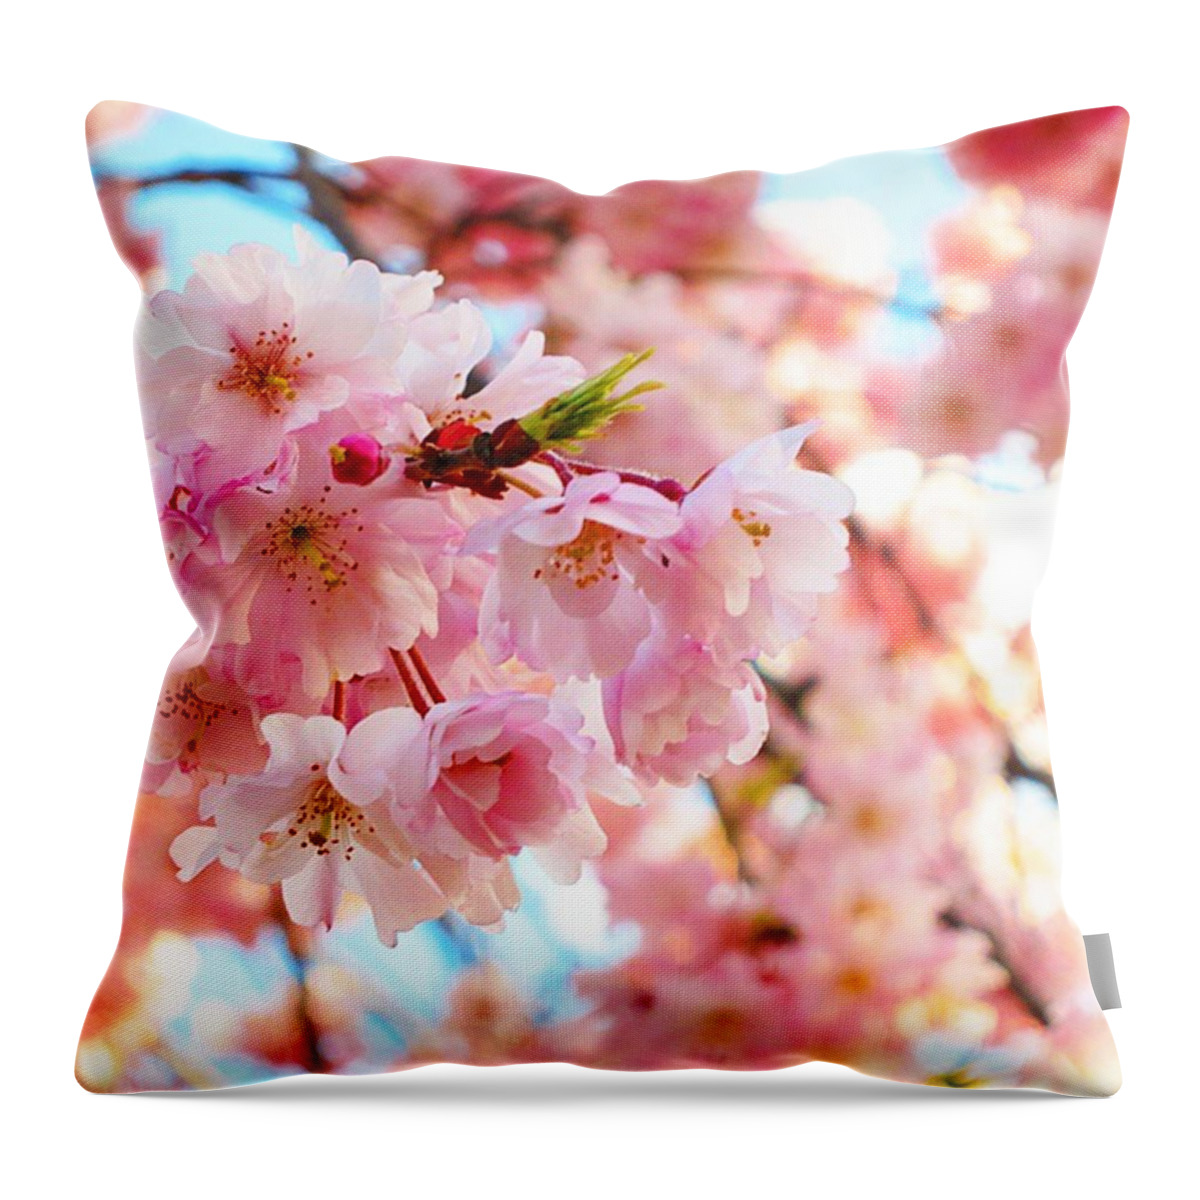 Pink Throw Pillow featuring the photograph Cherry blossom by Elinor